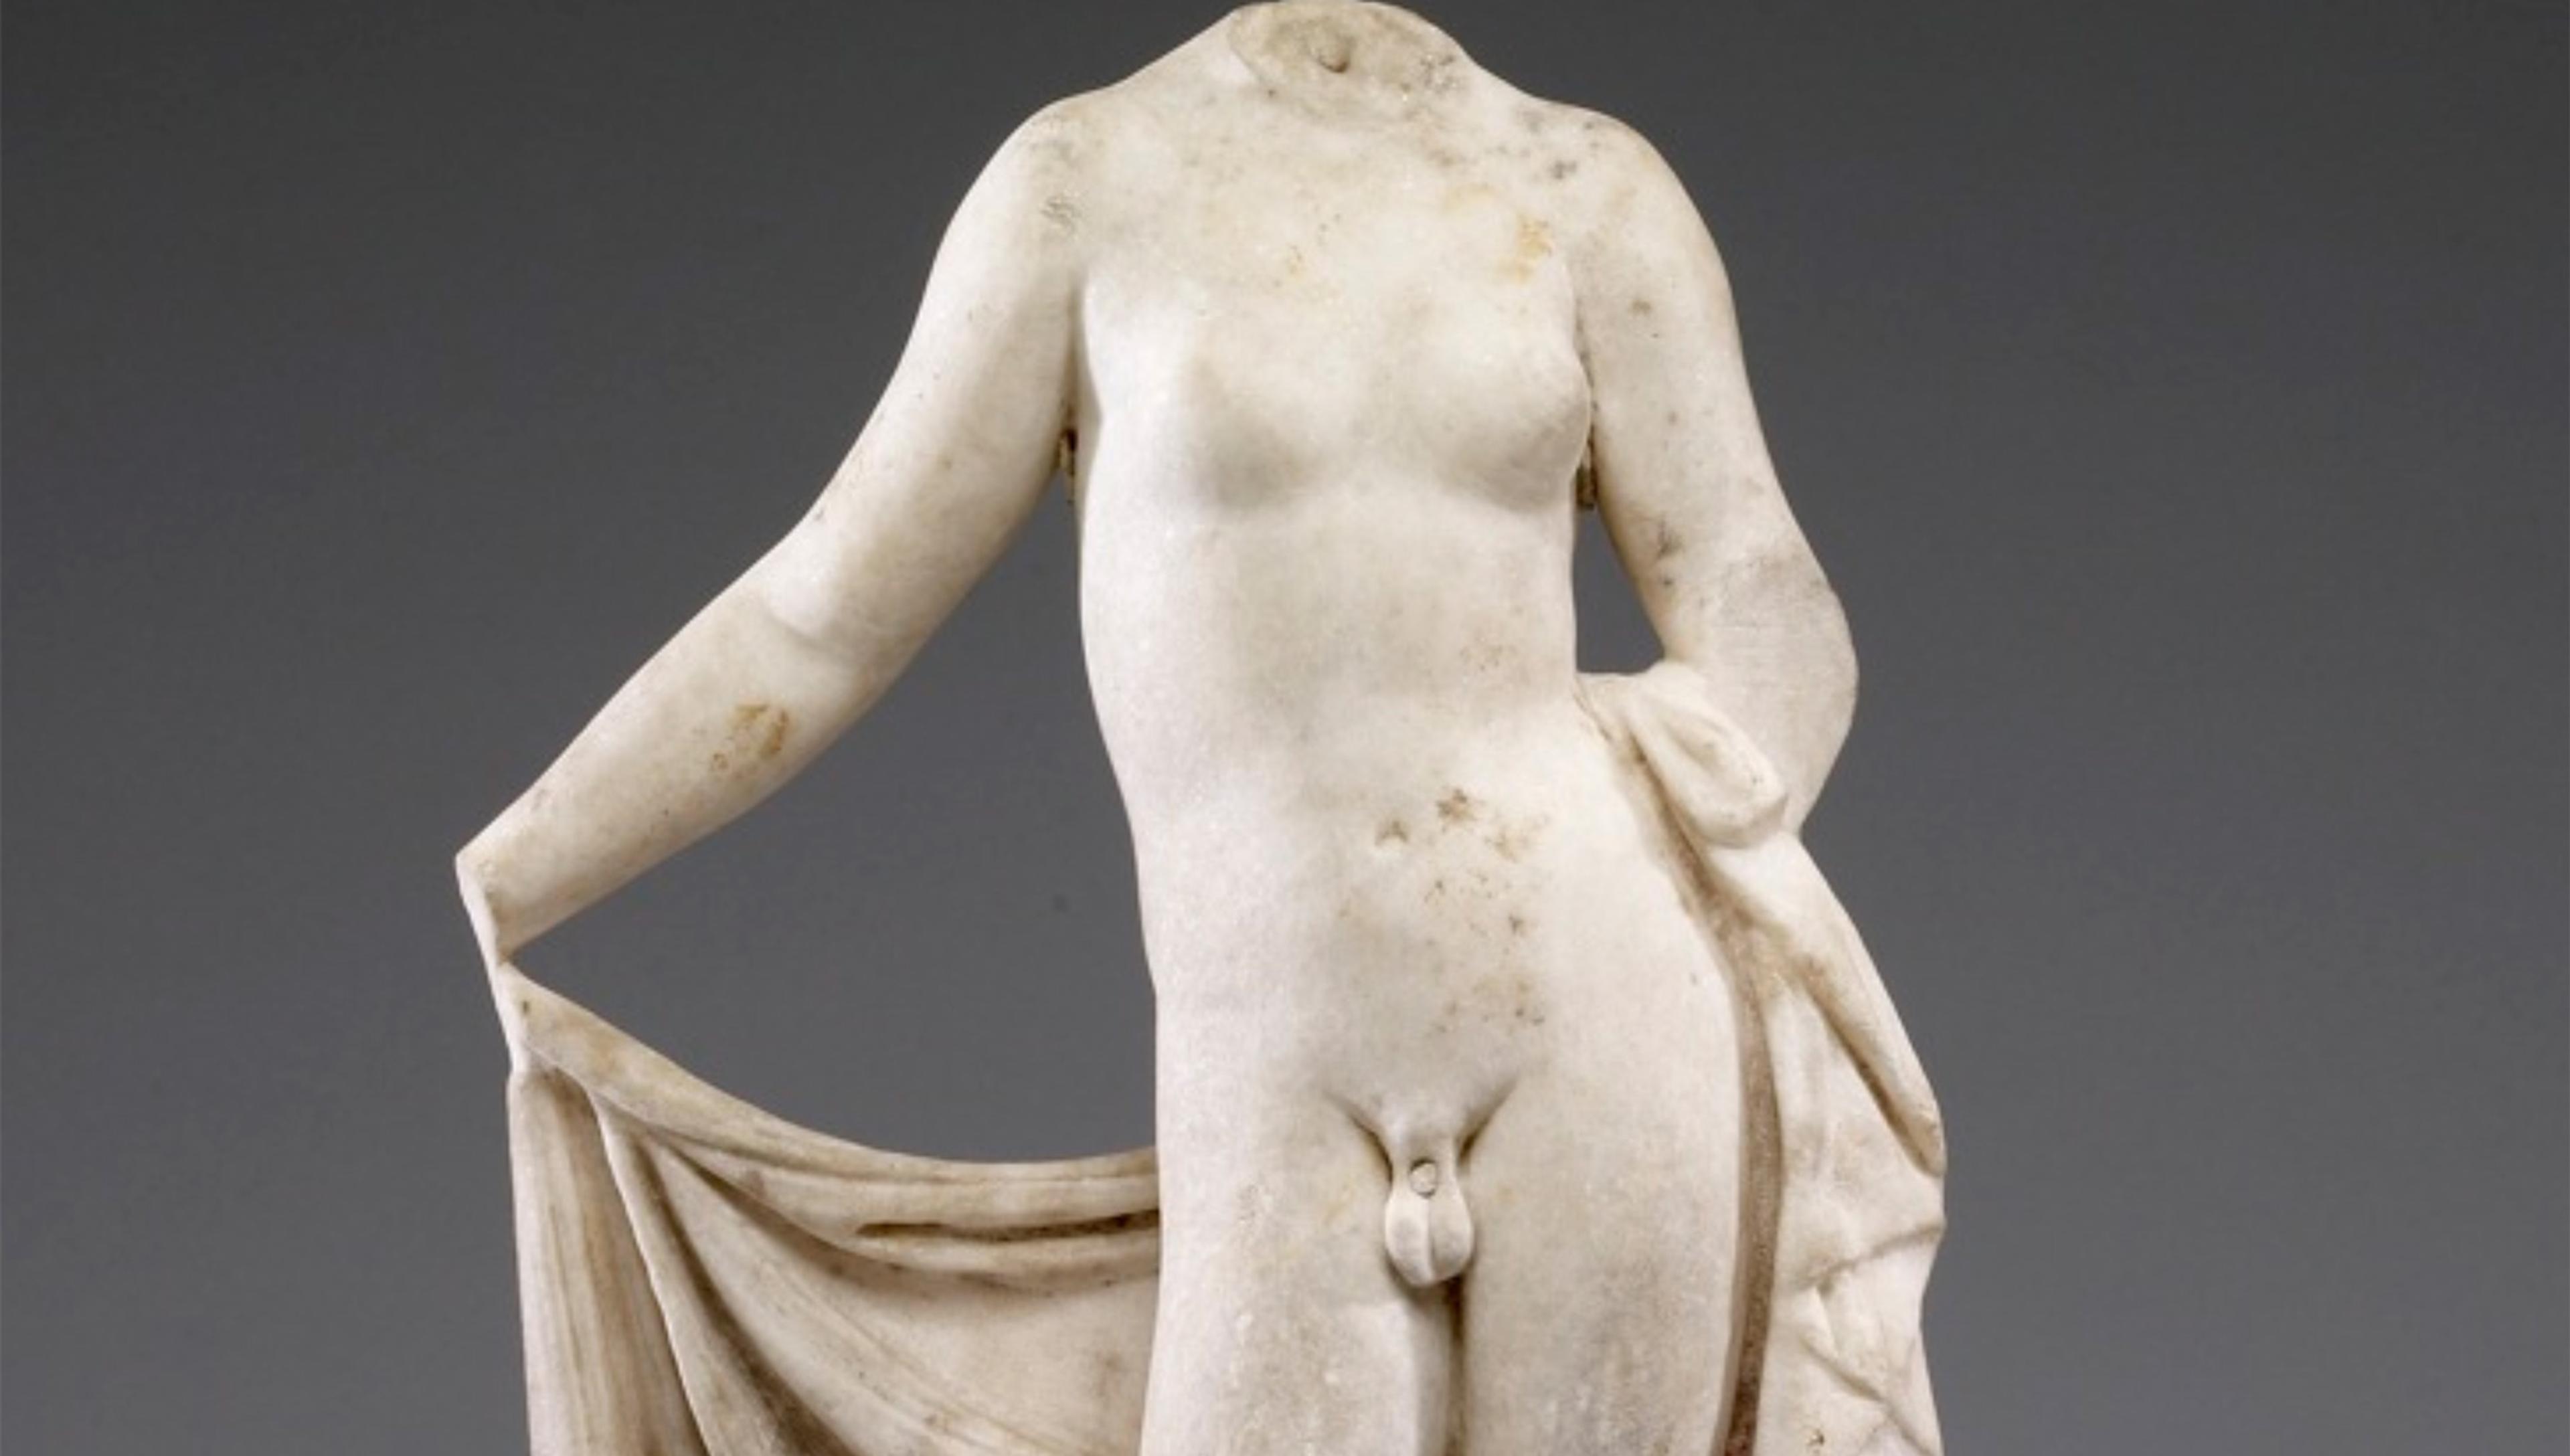 Marble statue of Hermaphroditus, depicting a naked human figure with male and female features, leaning forward slightly and holding a draped cloth in one hand, set against a plain background. The statue lacks a head.